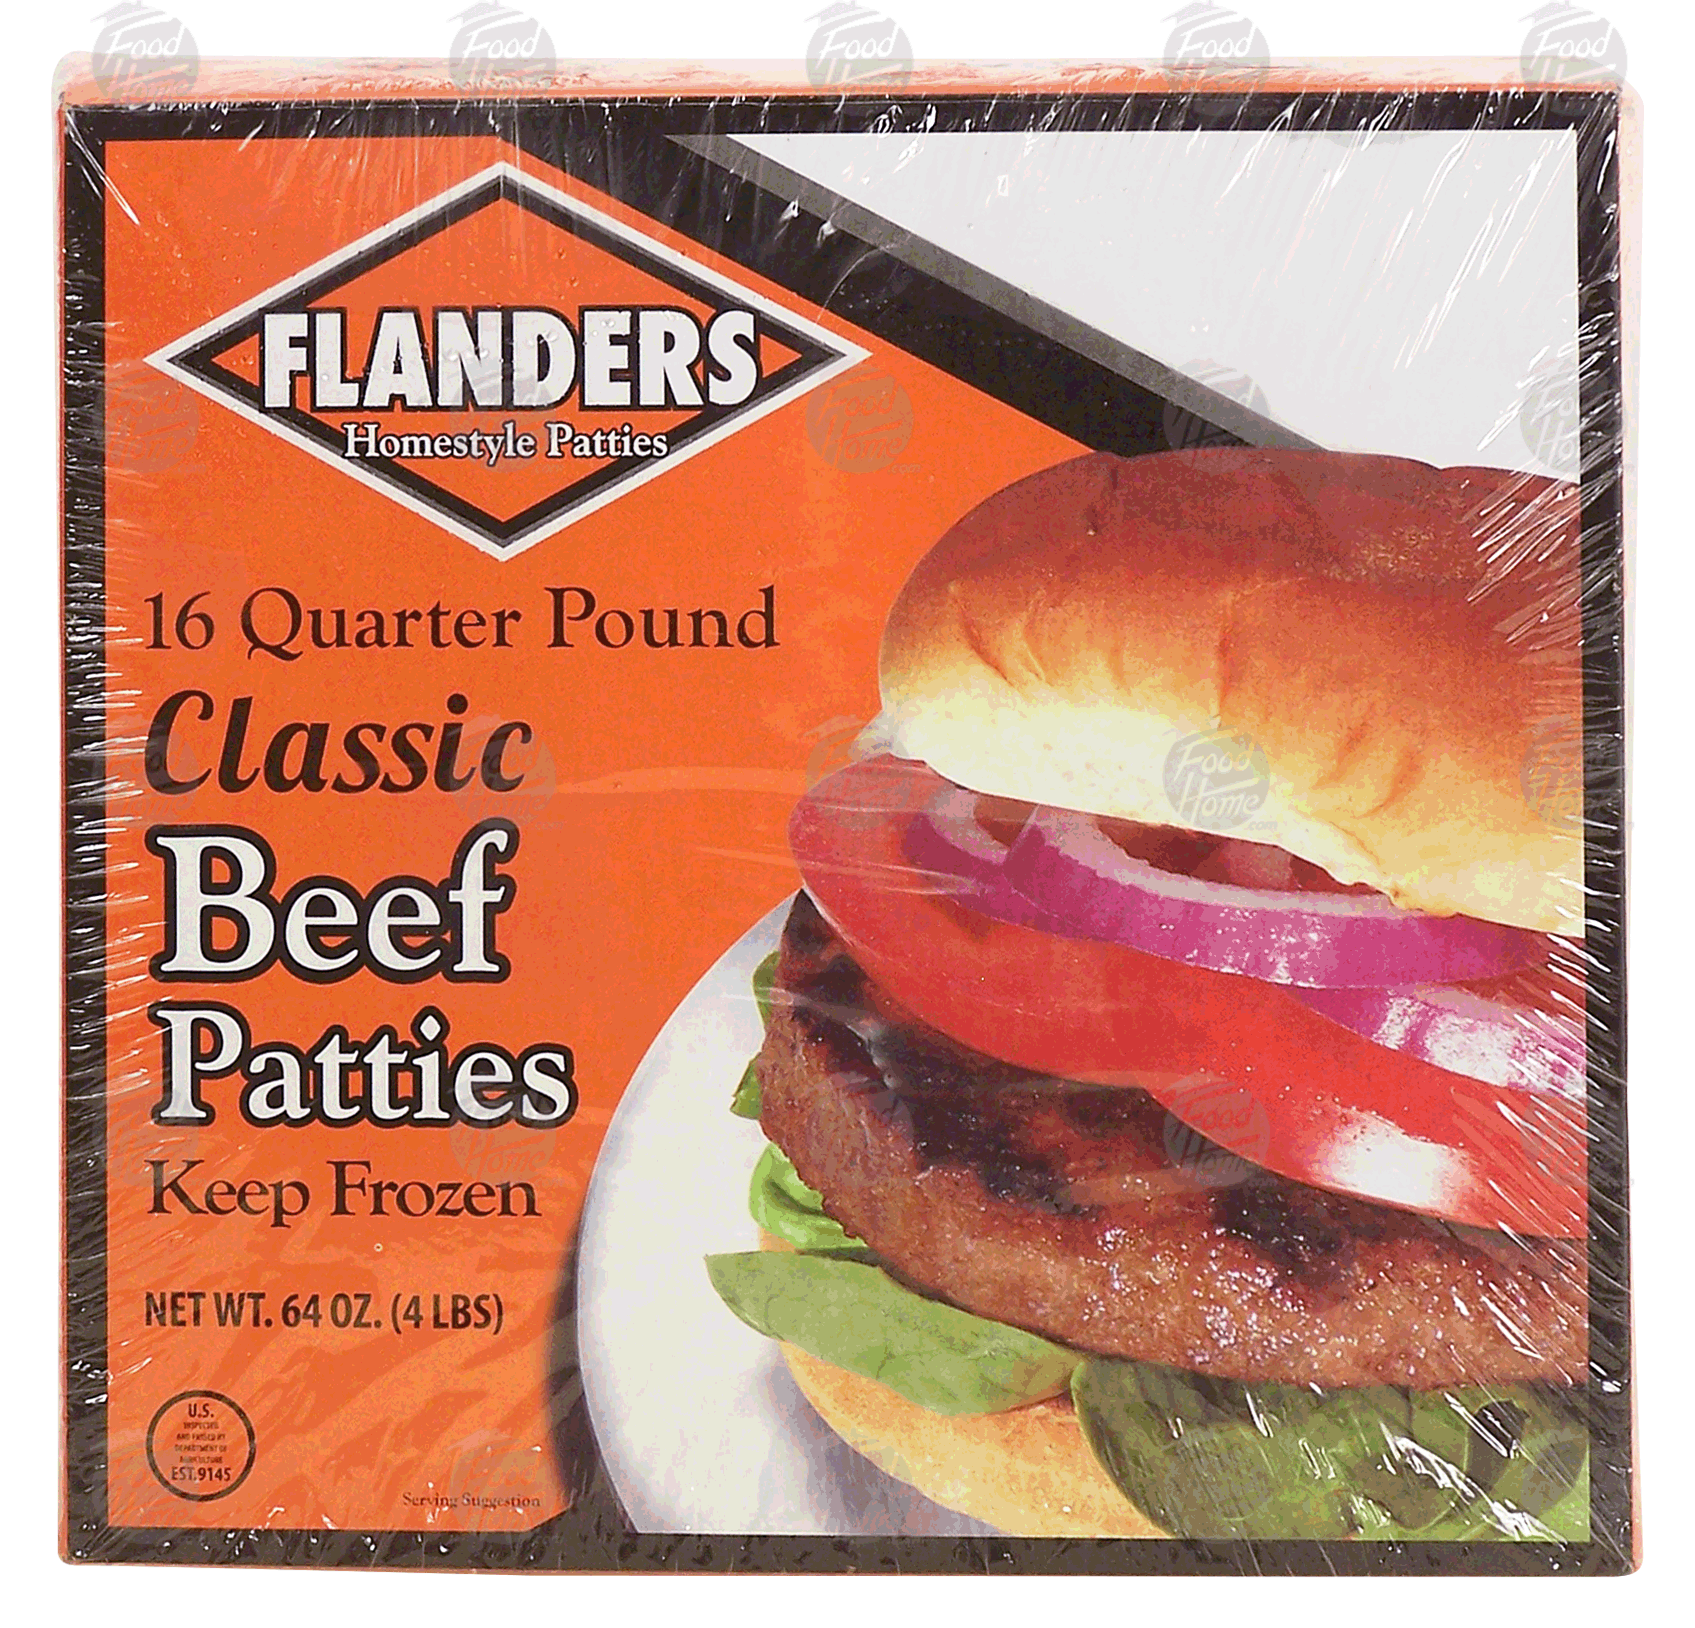 Flanders Homestyle Patties 16 quarter pound classic beef patties Full-Size Picture